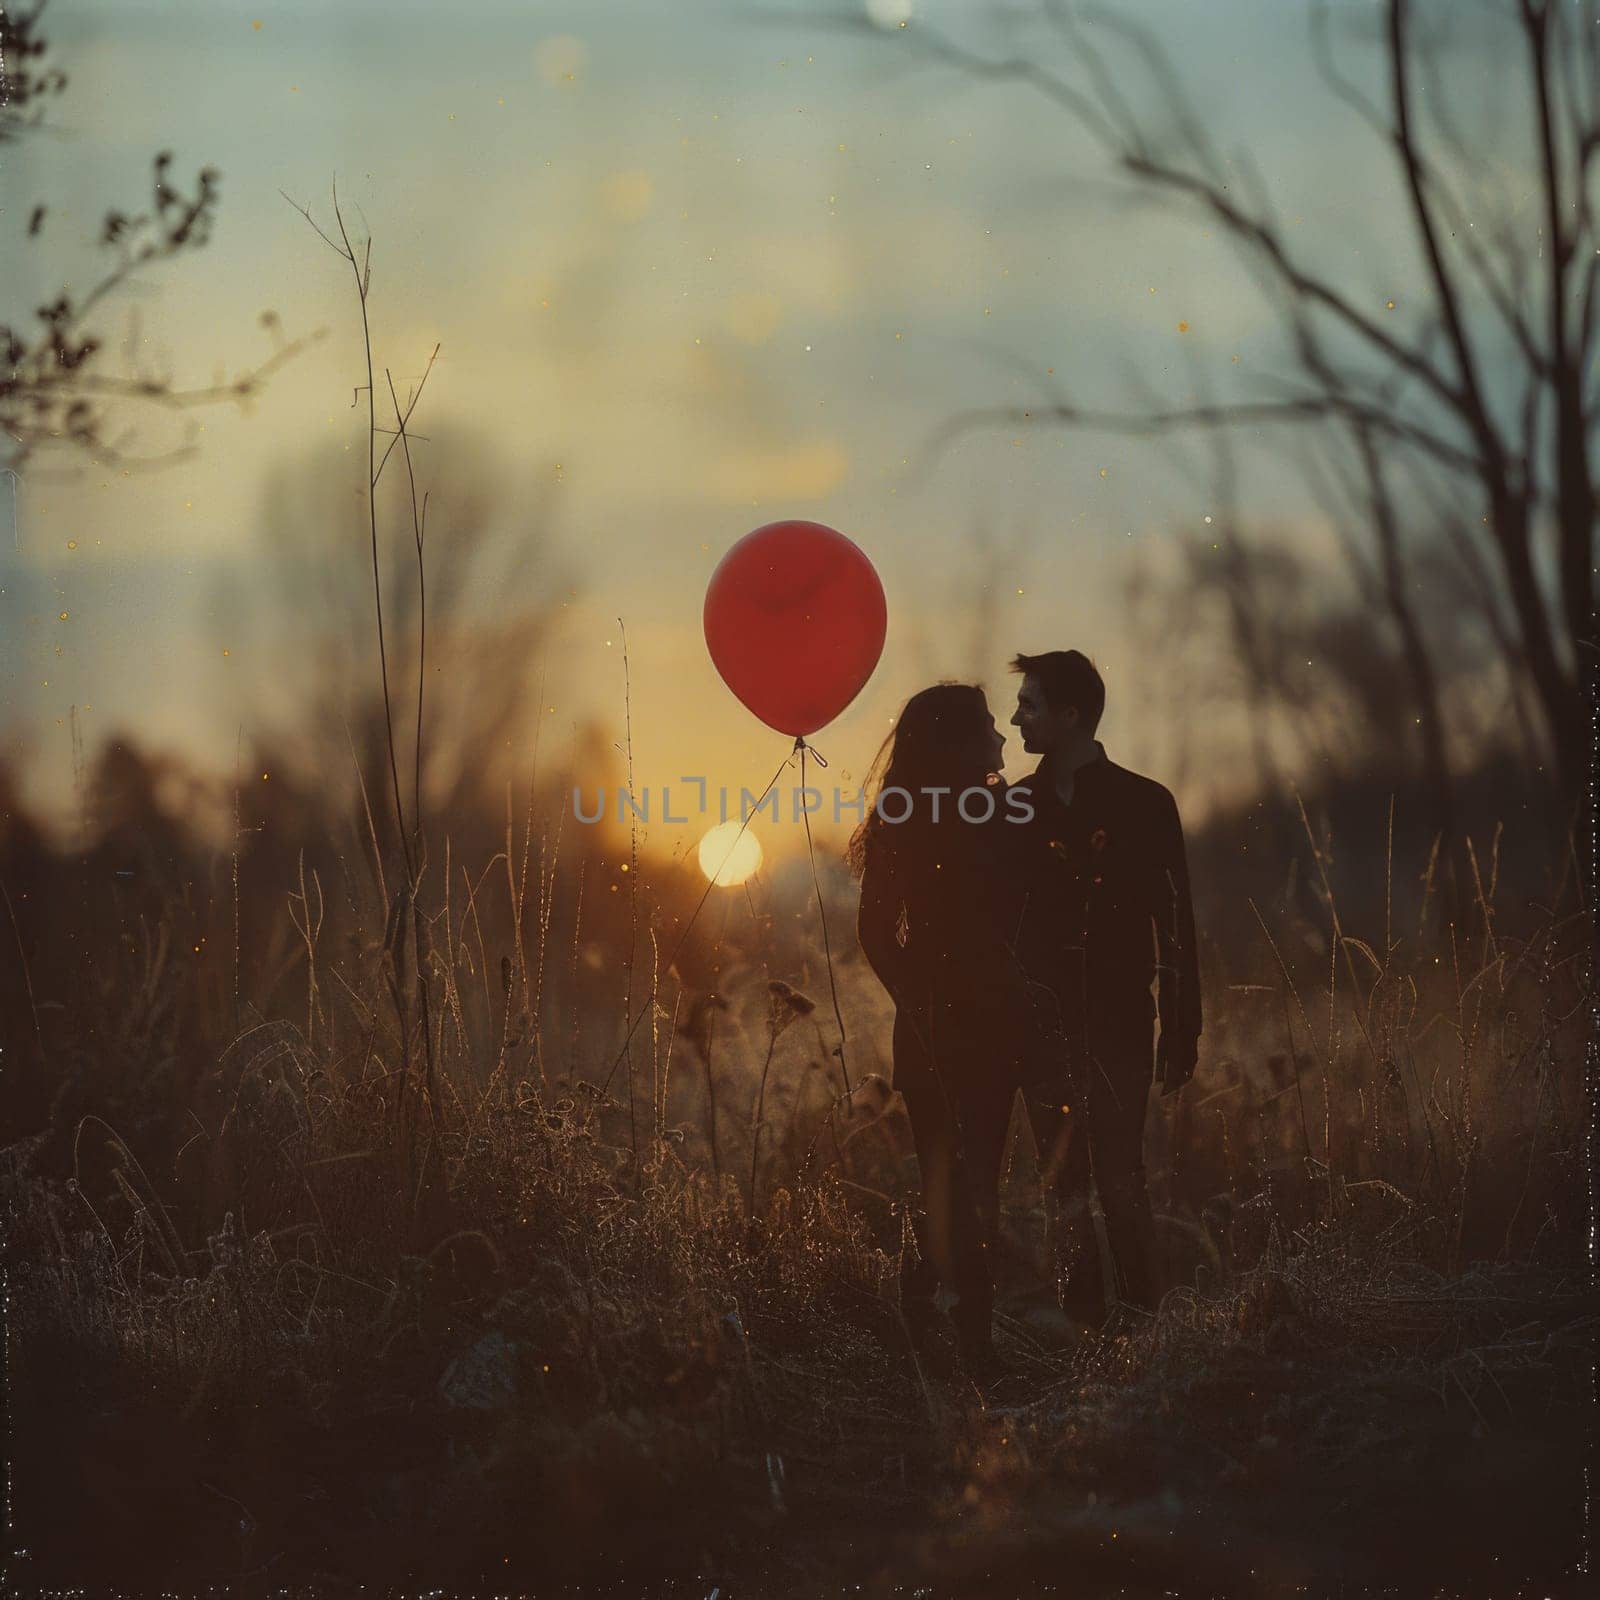 Man and Woman Standing in Field With Red Balloon by but_photo